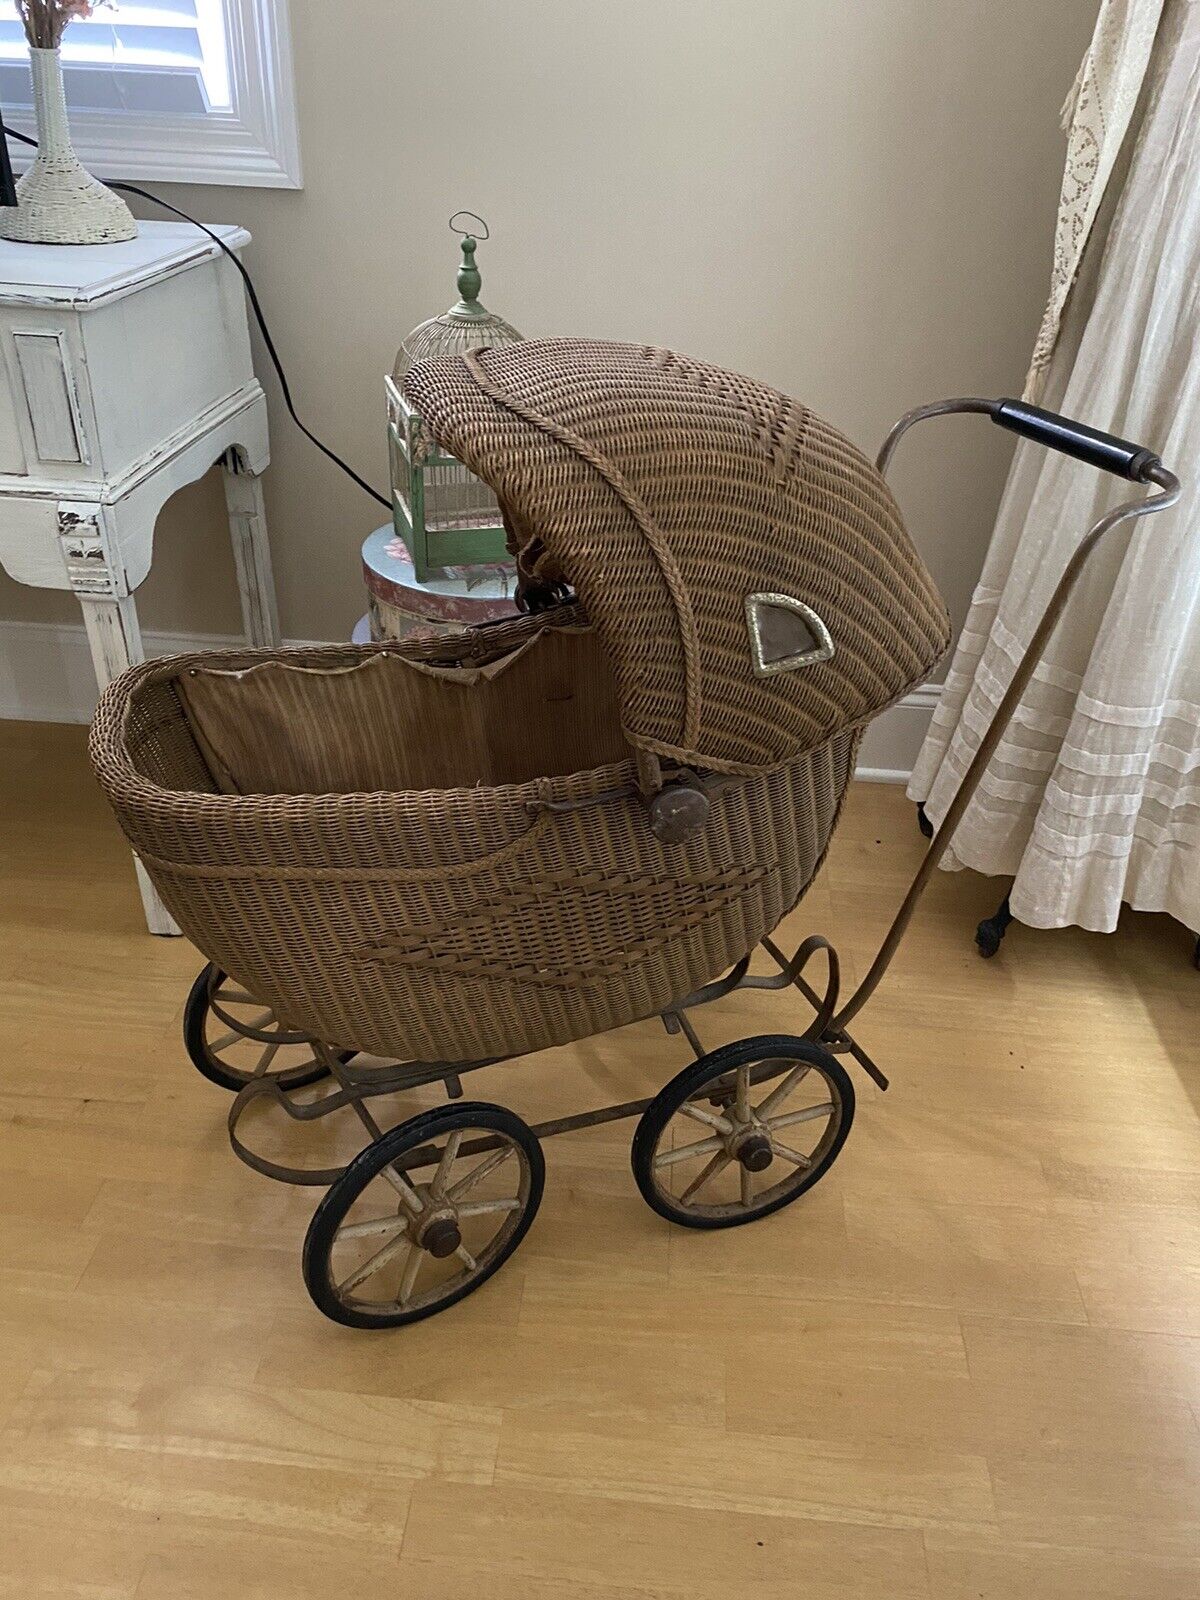 Vintage WICKER STROLLER Pram Antique Carriage Baby Doll Buggy